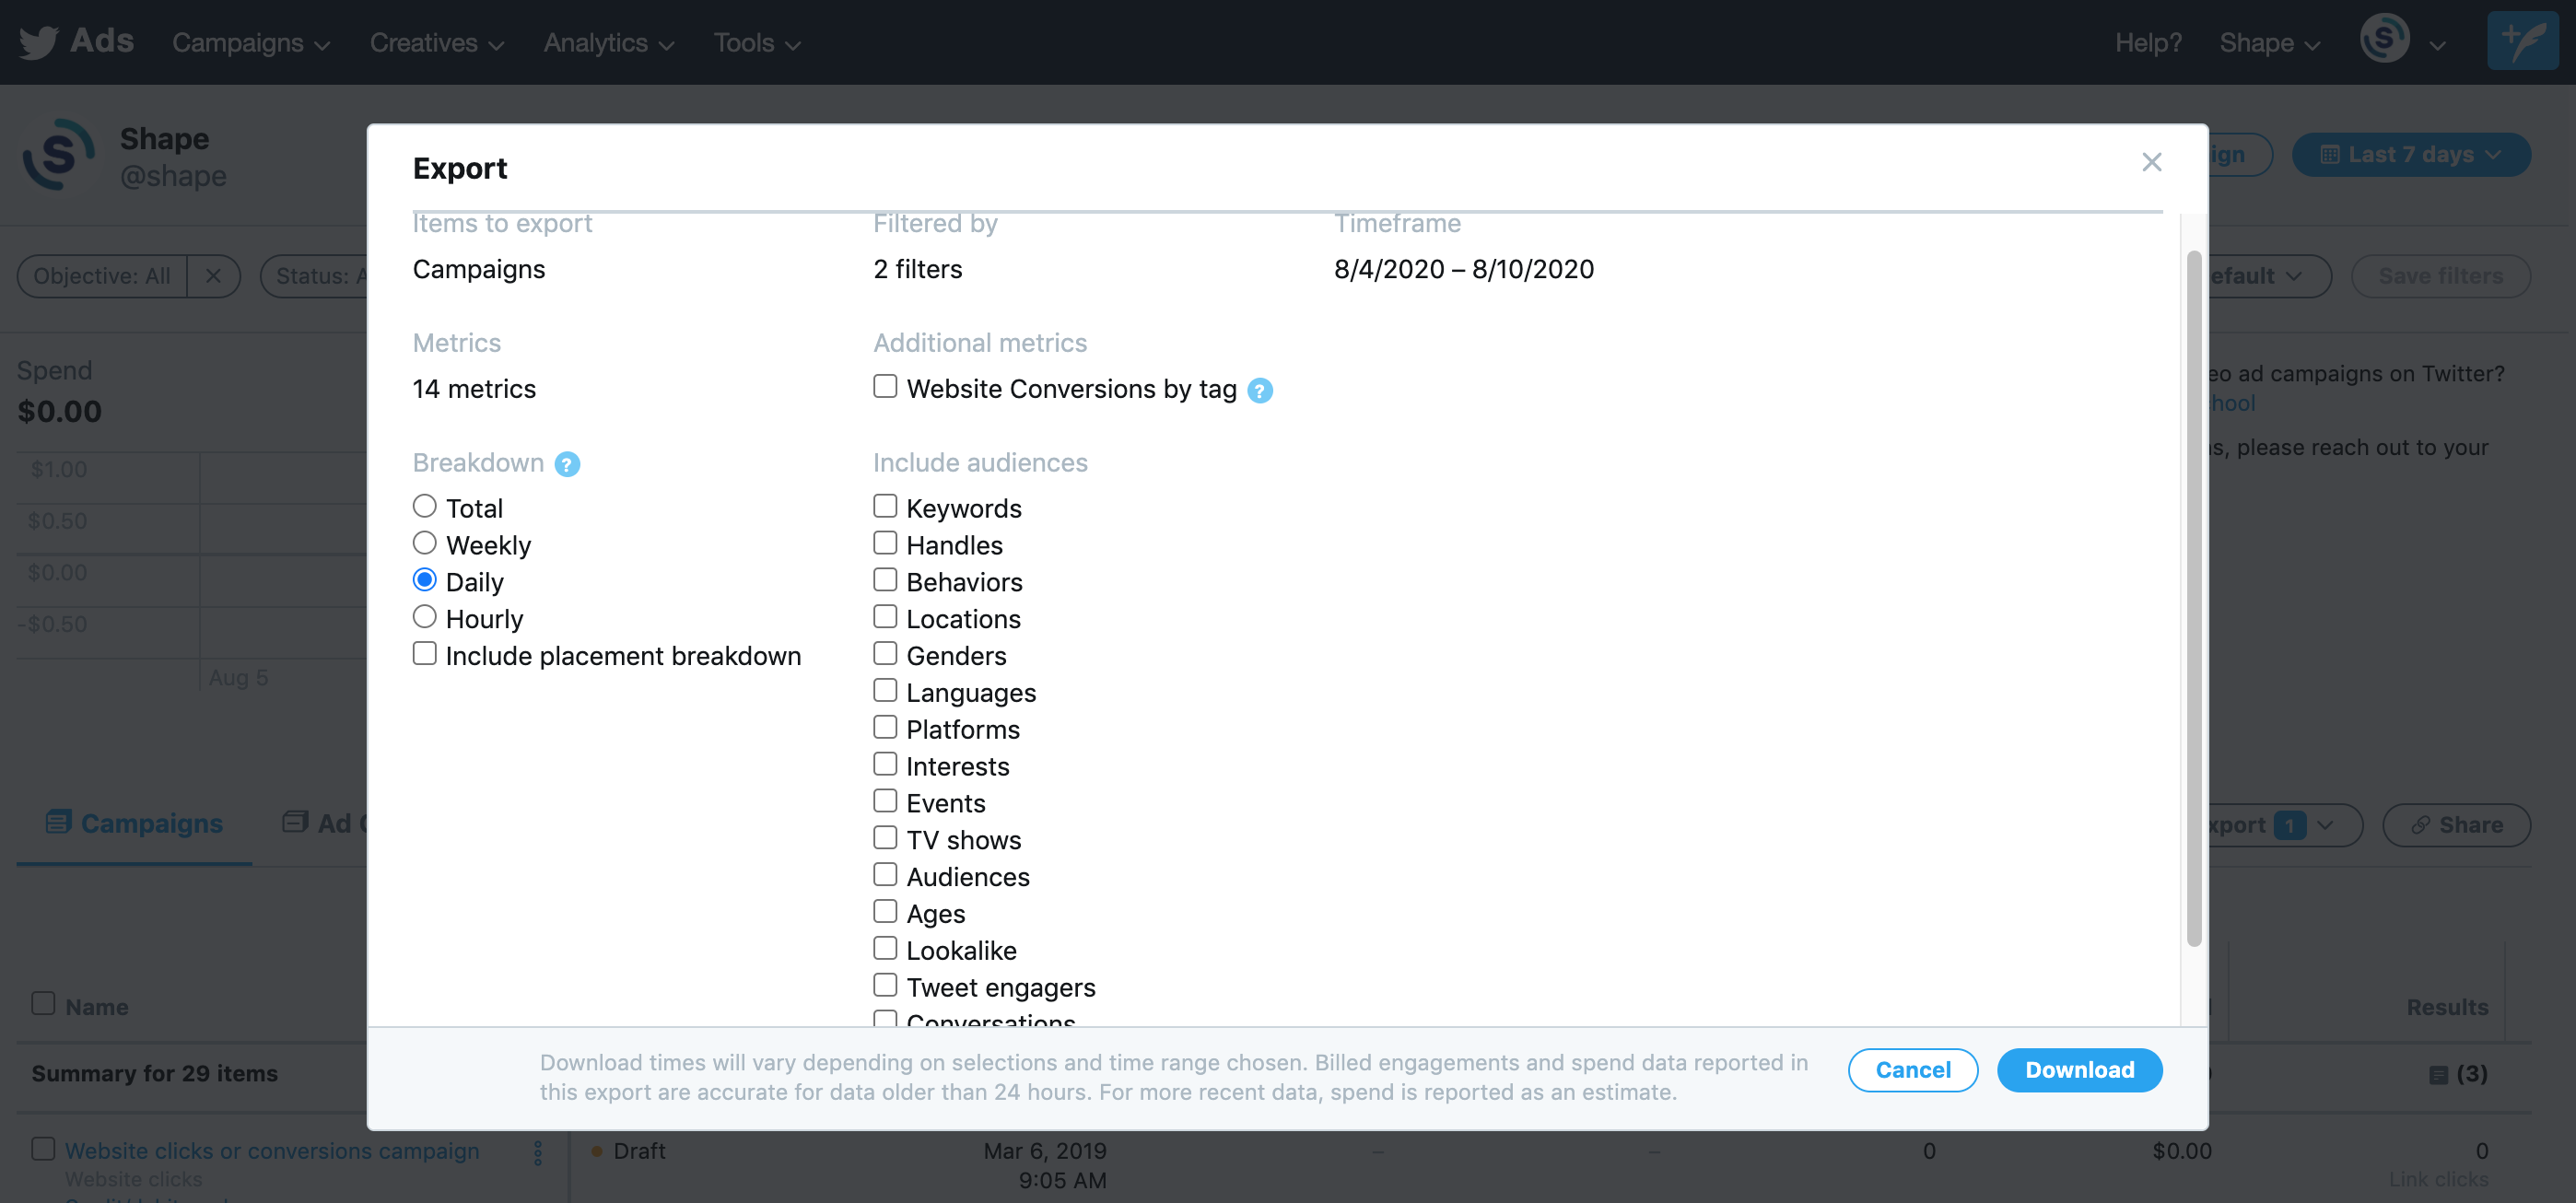 Twitter Ads interface showing how to download a report